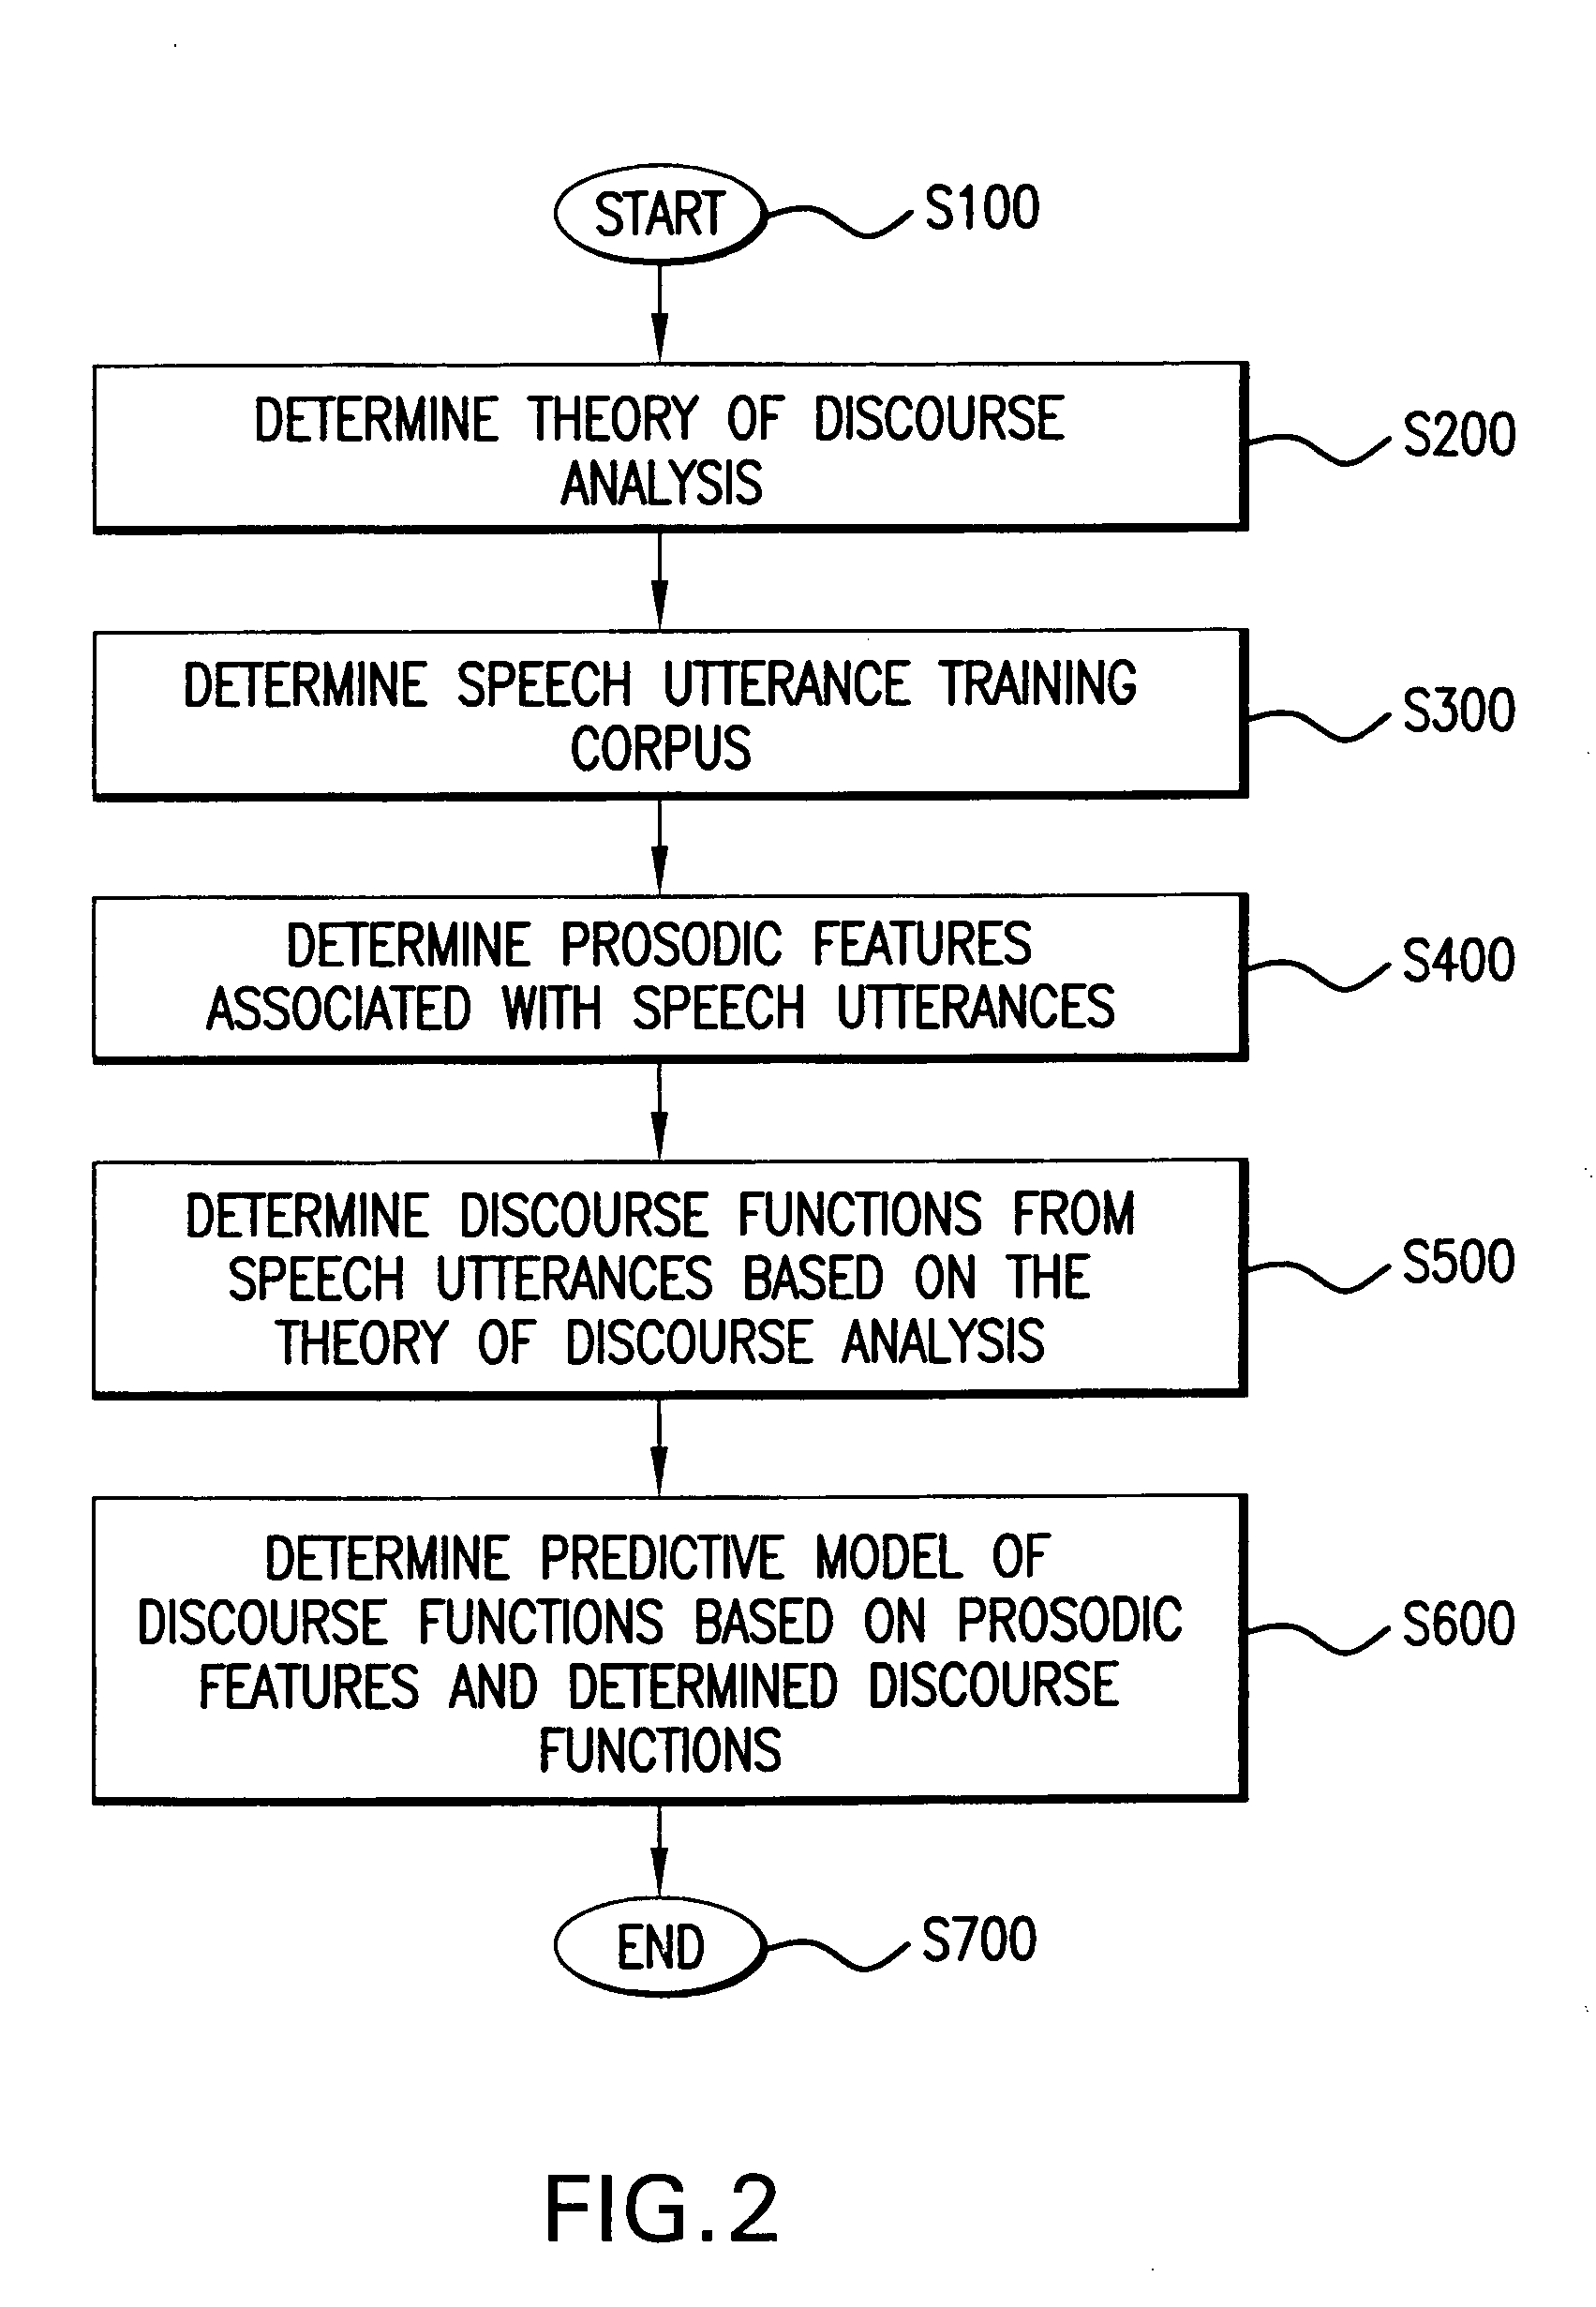 Systems and methods for determining predictive models of discourse functions